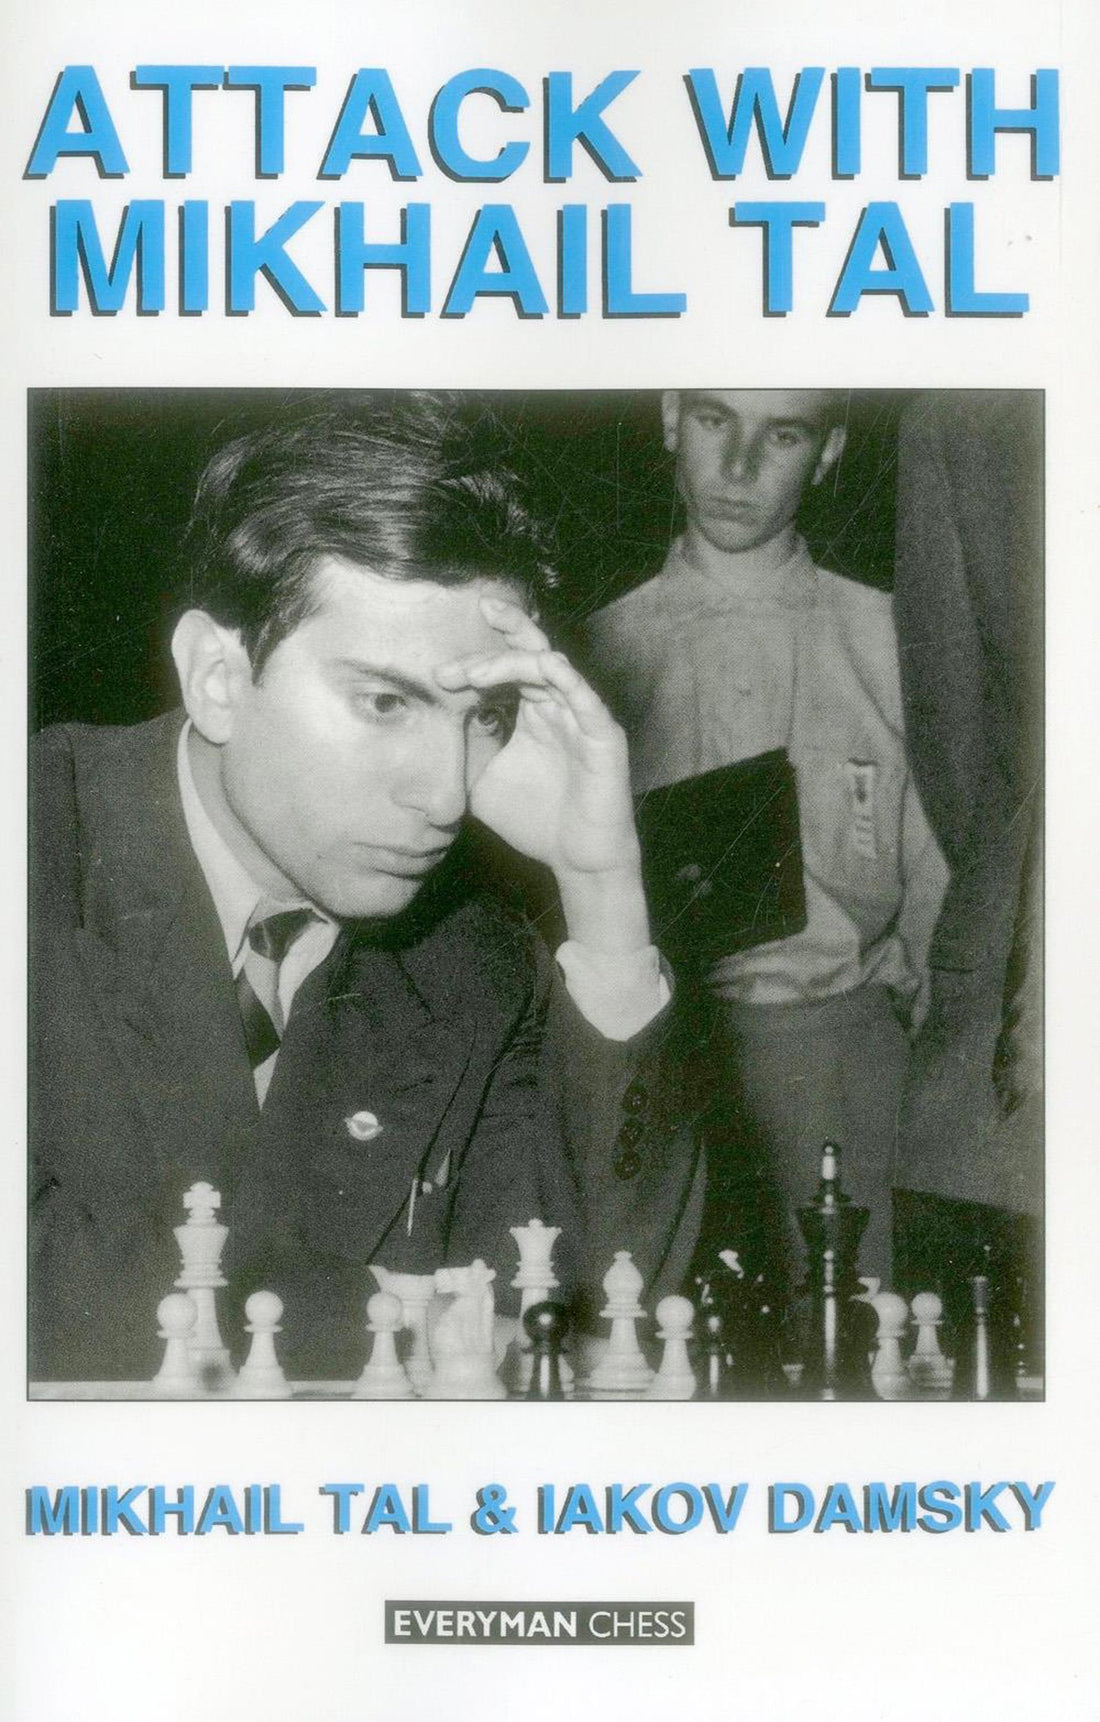  Attack with Mikhail Tal front cover